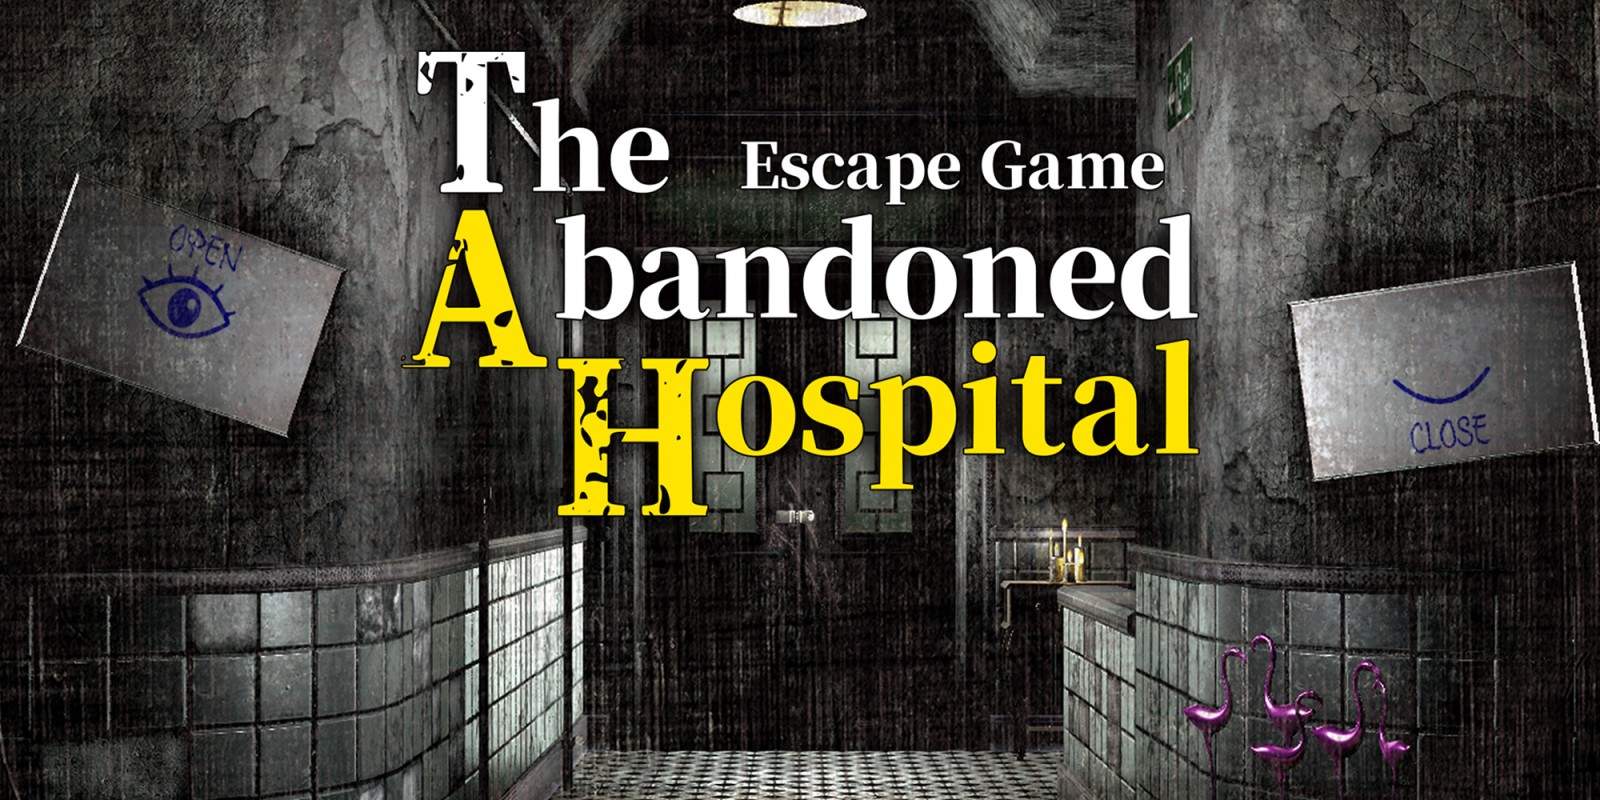 Escape Game The Abandoned Hospital